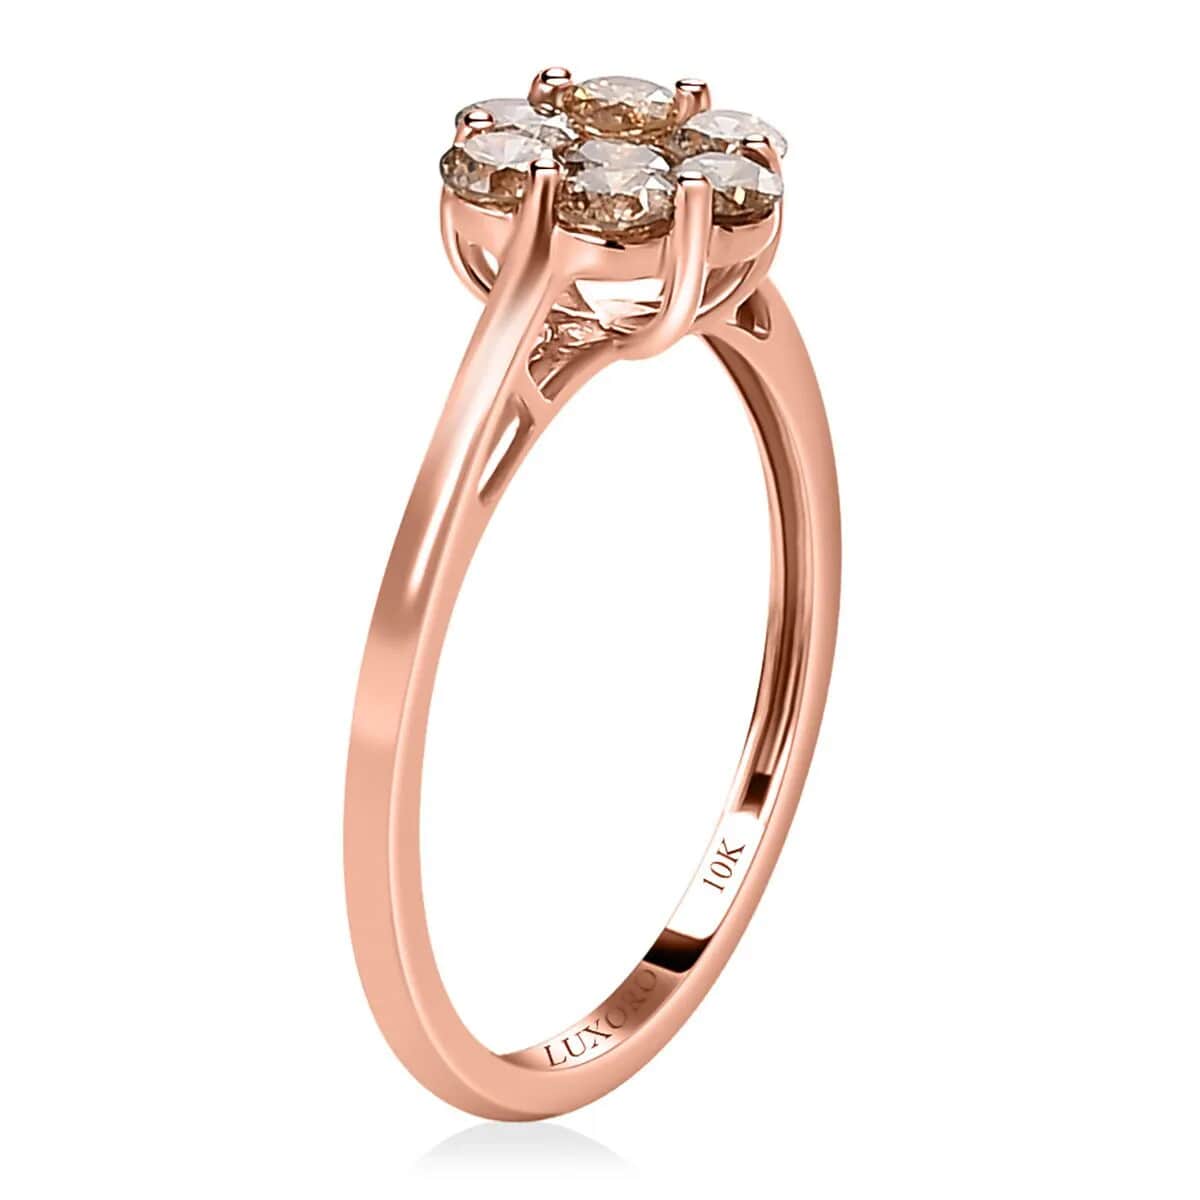 Luxoro 10K Rose Gold Natural Champagne Diamond Floral Ring ,Diamond Floral Ring, Engagement Rings, Seven Stone Ring For Women 0.50 ctw (Size 5.0) image number 3